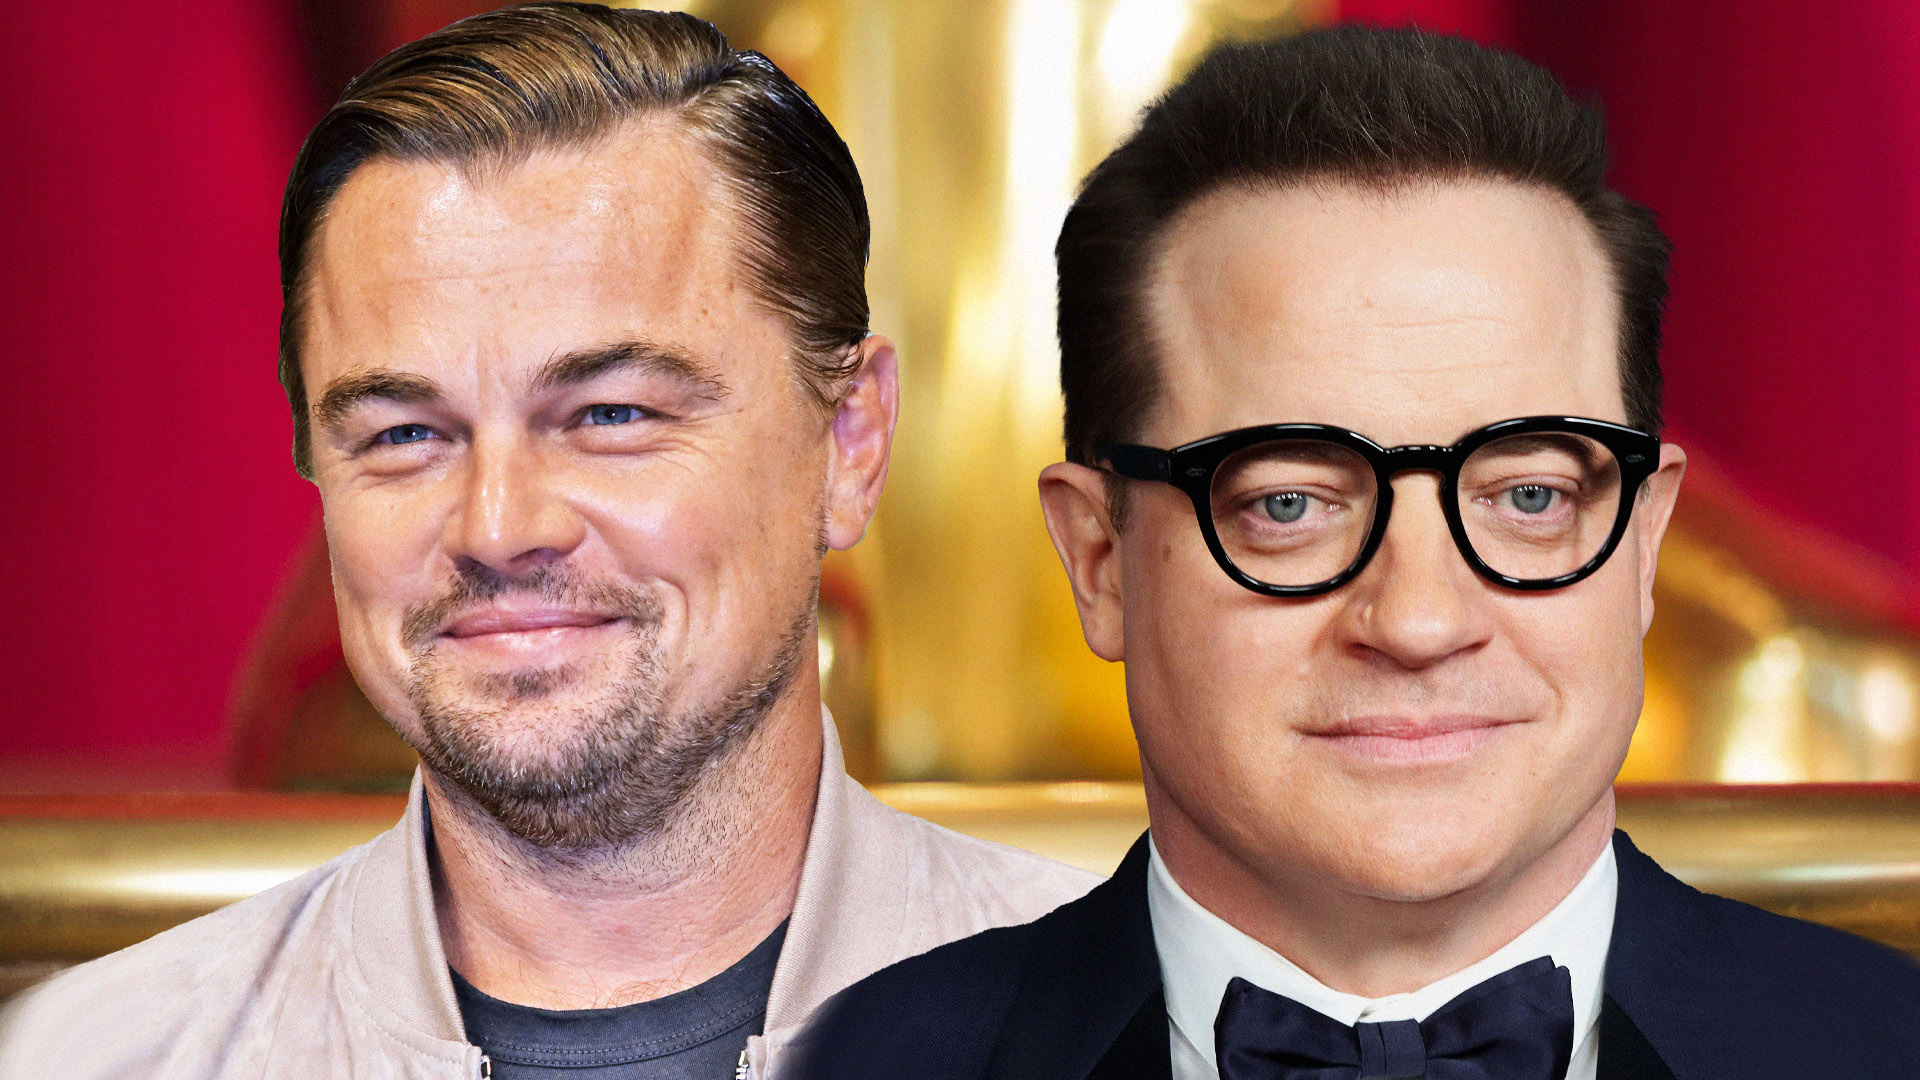 DiCaprio Had Just One Thing to Say About Brendan Fraser's On-Set Demeanor